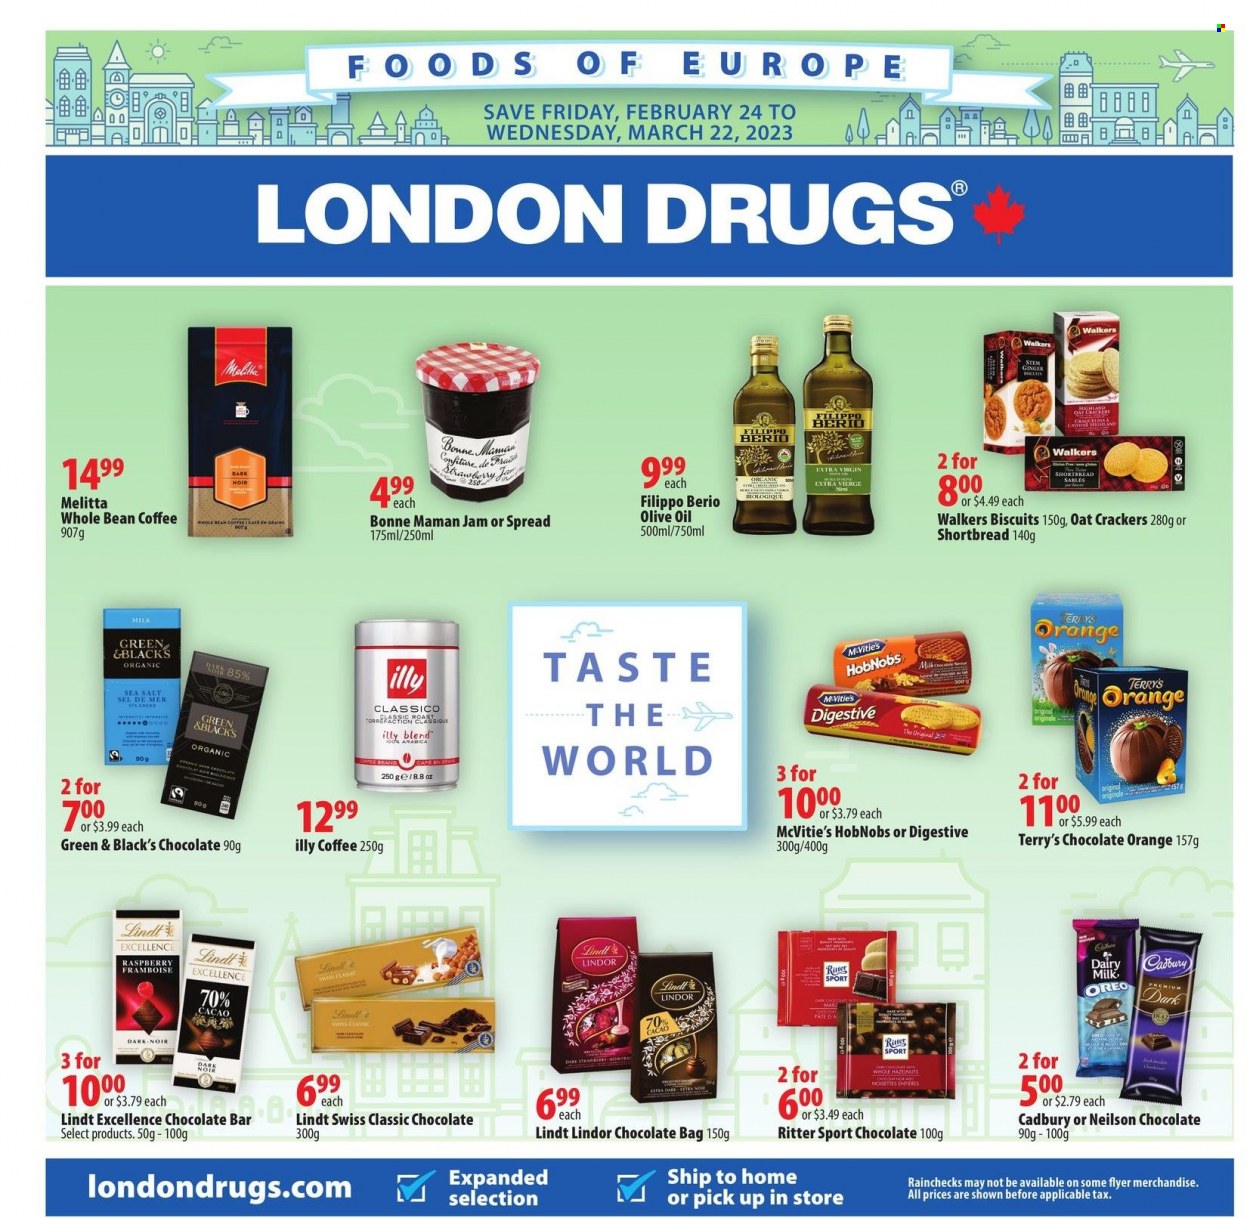 thumbnail - London Drugs Flyer - February 24, 2023 - March 22, 2023 - Sales products - crackers, biscuit, Cadbury, Dairy Milk, Ritter Sport, chocolate bar, flour, oats, ginger, Classico, extra virgin olive oil, olive oil, oil, fruit jam, hazelnuts, coffee, Illy, Oreo, Lindt, Lindor. Page 1.